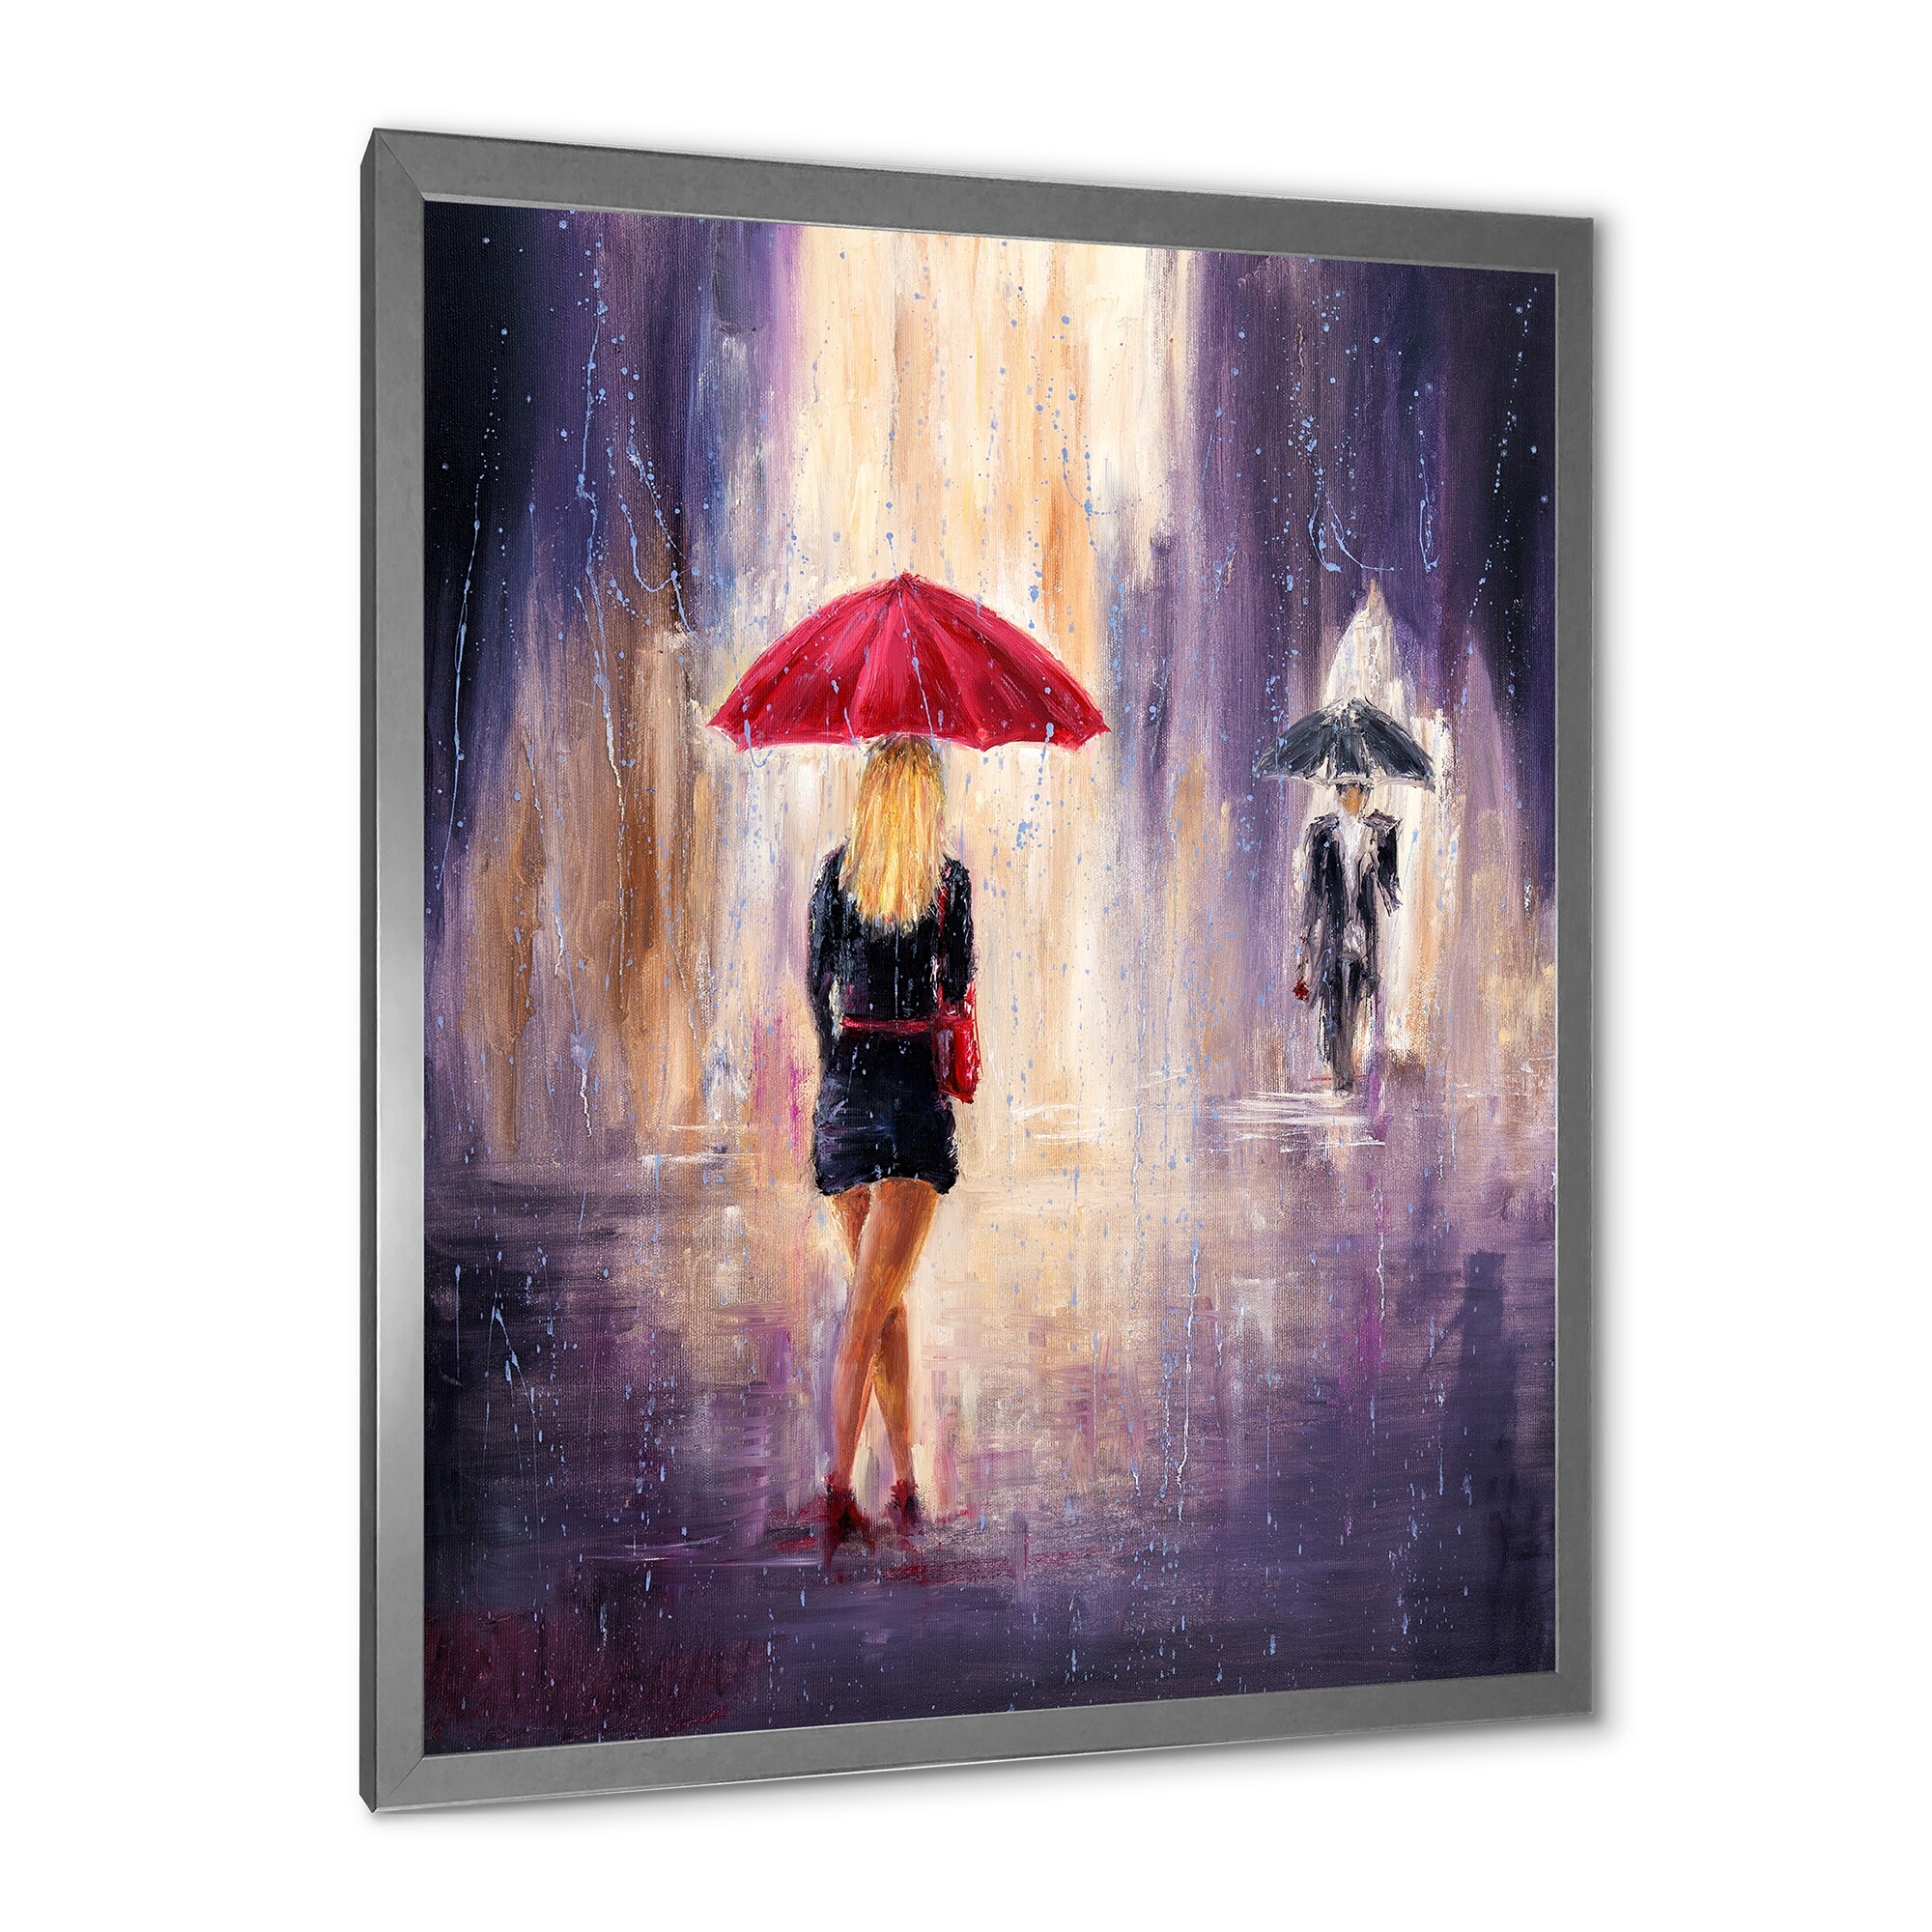 Designart "The Woman With The Umbrella Walking In The Rain II" French Country Framed Art Print